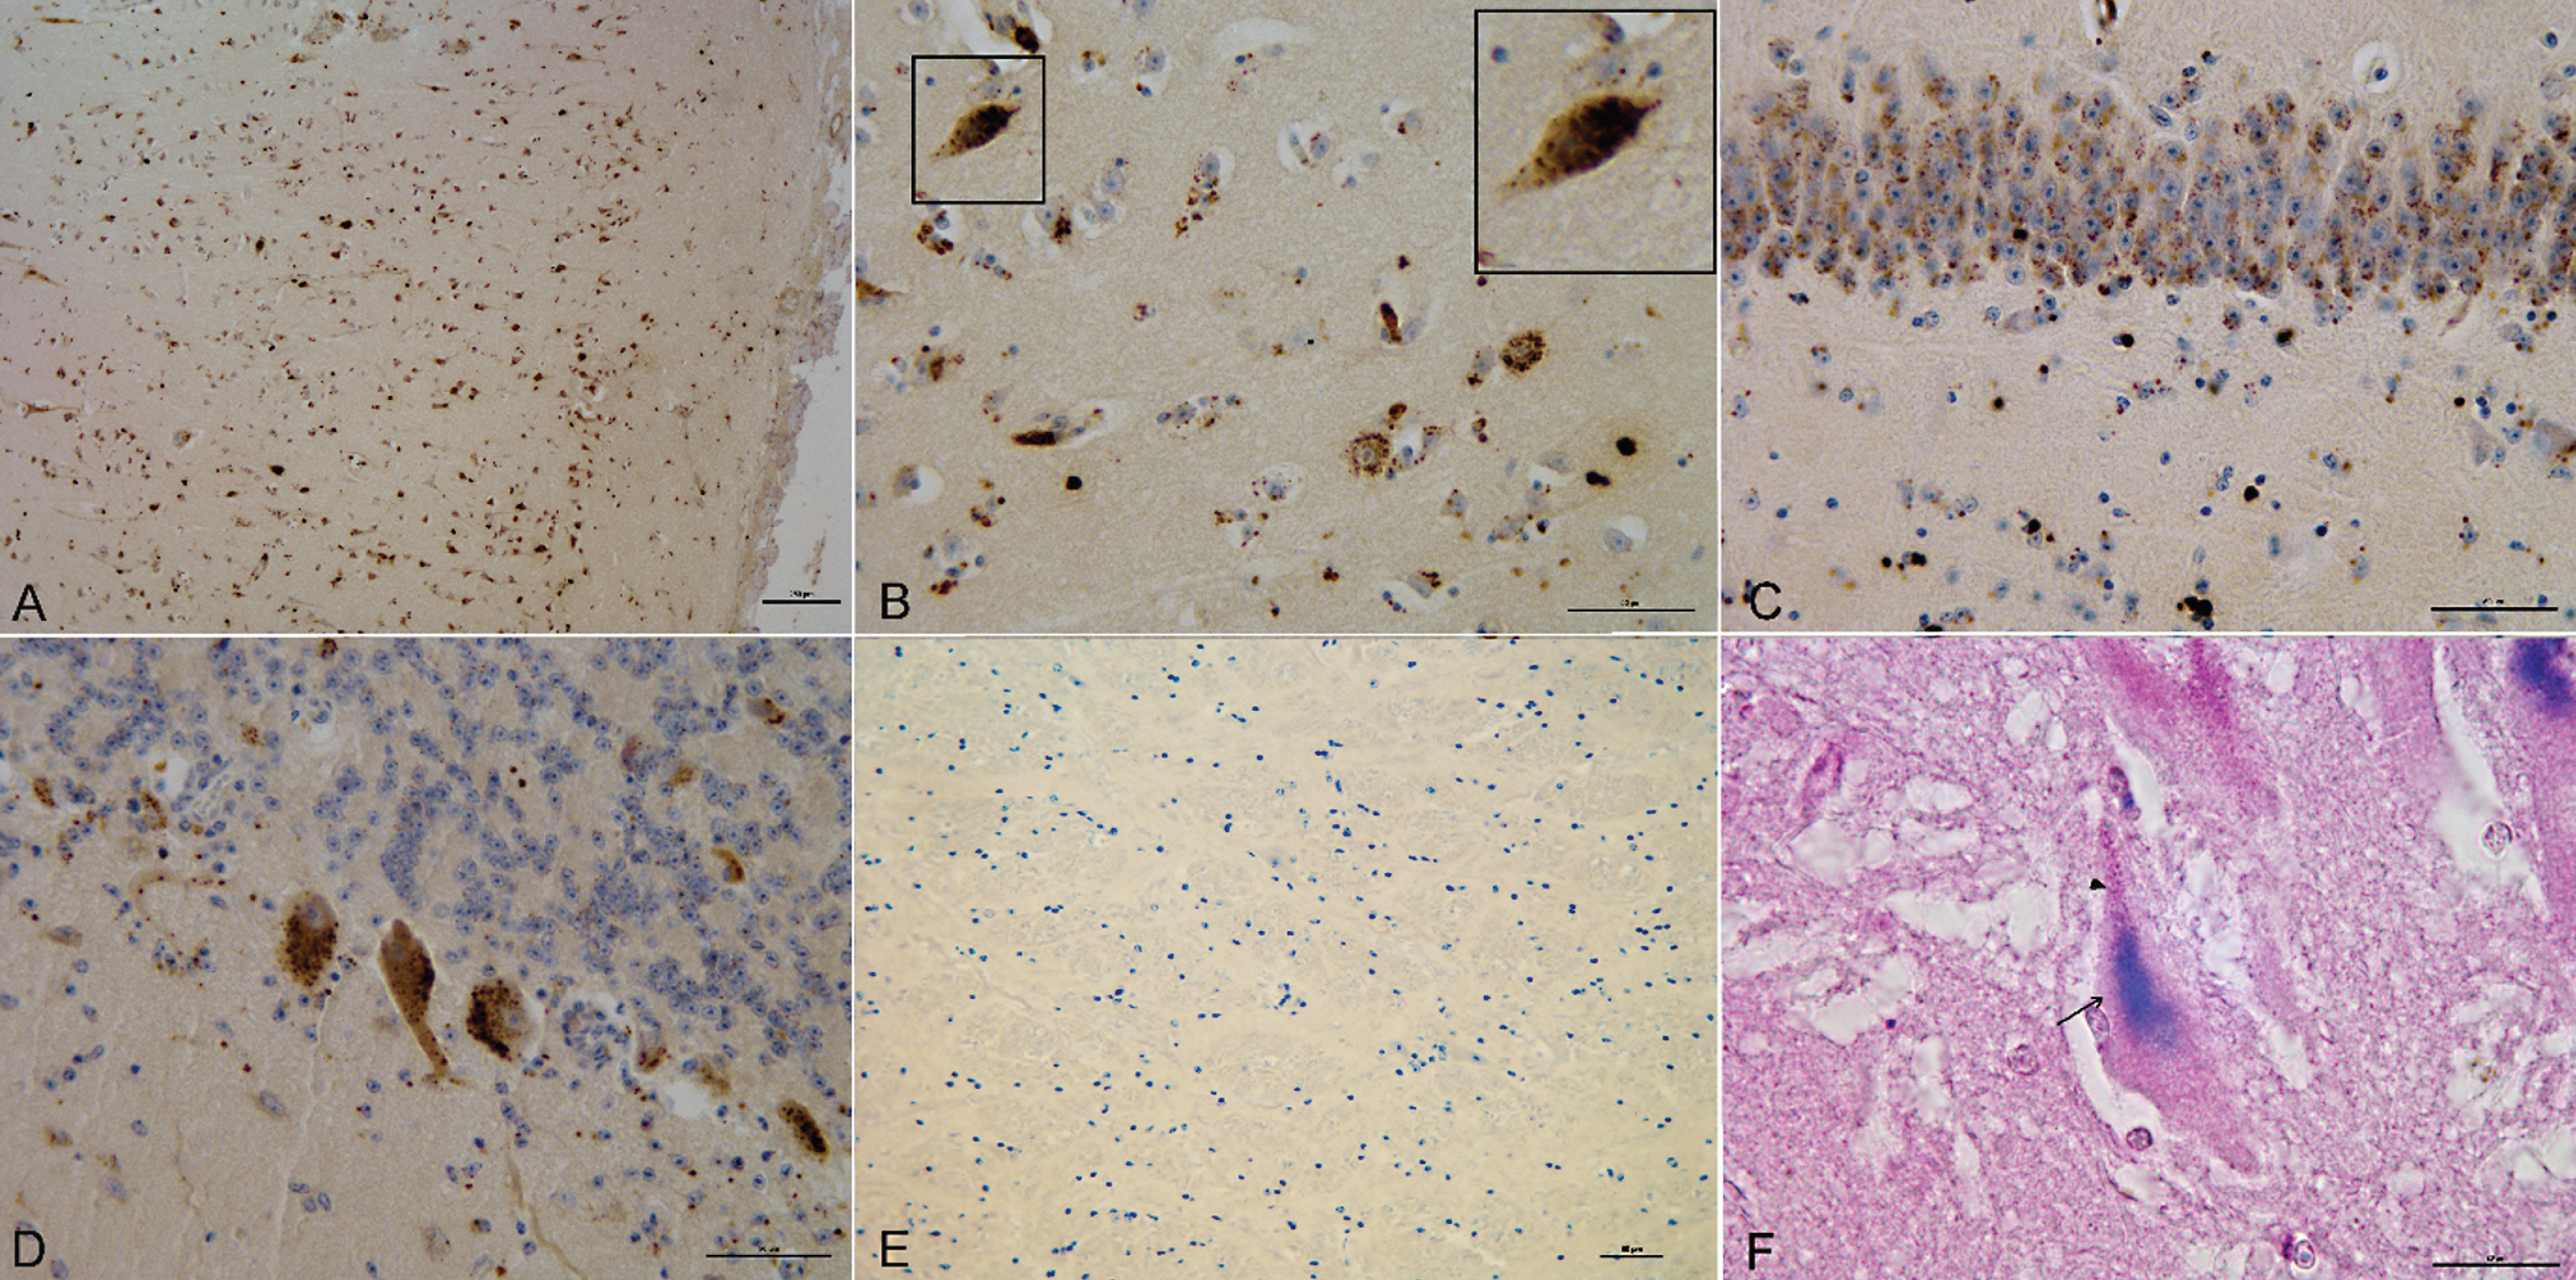 IHC and IHC: HC immunoreactive deposits in different brain areas. A) 4G8-deposits in the frontal cortex. Bar = 250 μm. B) 4G8-deposits in the frontal cortex (Bar = 50 μm) with magnification of intraneuronal localization (100x). C) 4G8-deposits in the hippocampus. Bar = 50 μm. D) 4G8-deposits in the cerebellum. Bar = 50 μm. E) Absence of 4G8-deposits in the brainstem. Bar = 50 μm. F) IHC: HC, 4G8-deposits (arrow) and lipofuscin (arrowhead) in the frontal cortex. Bar = 20 μm.